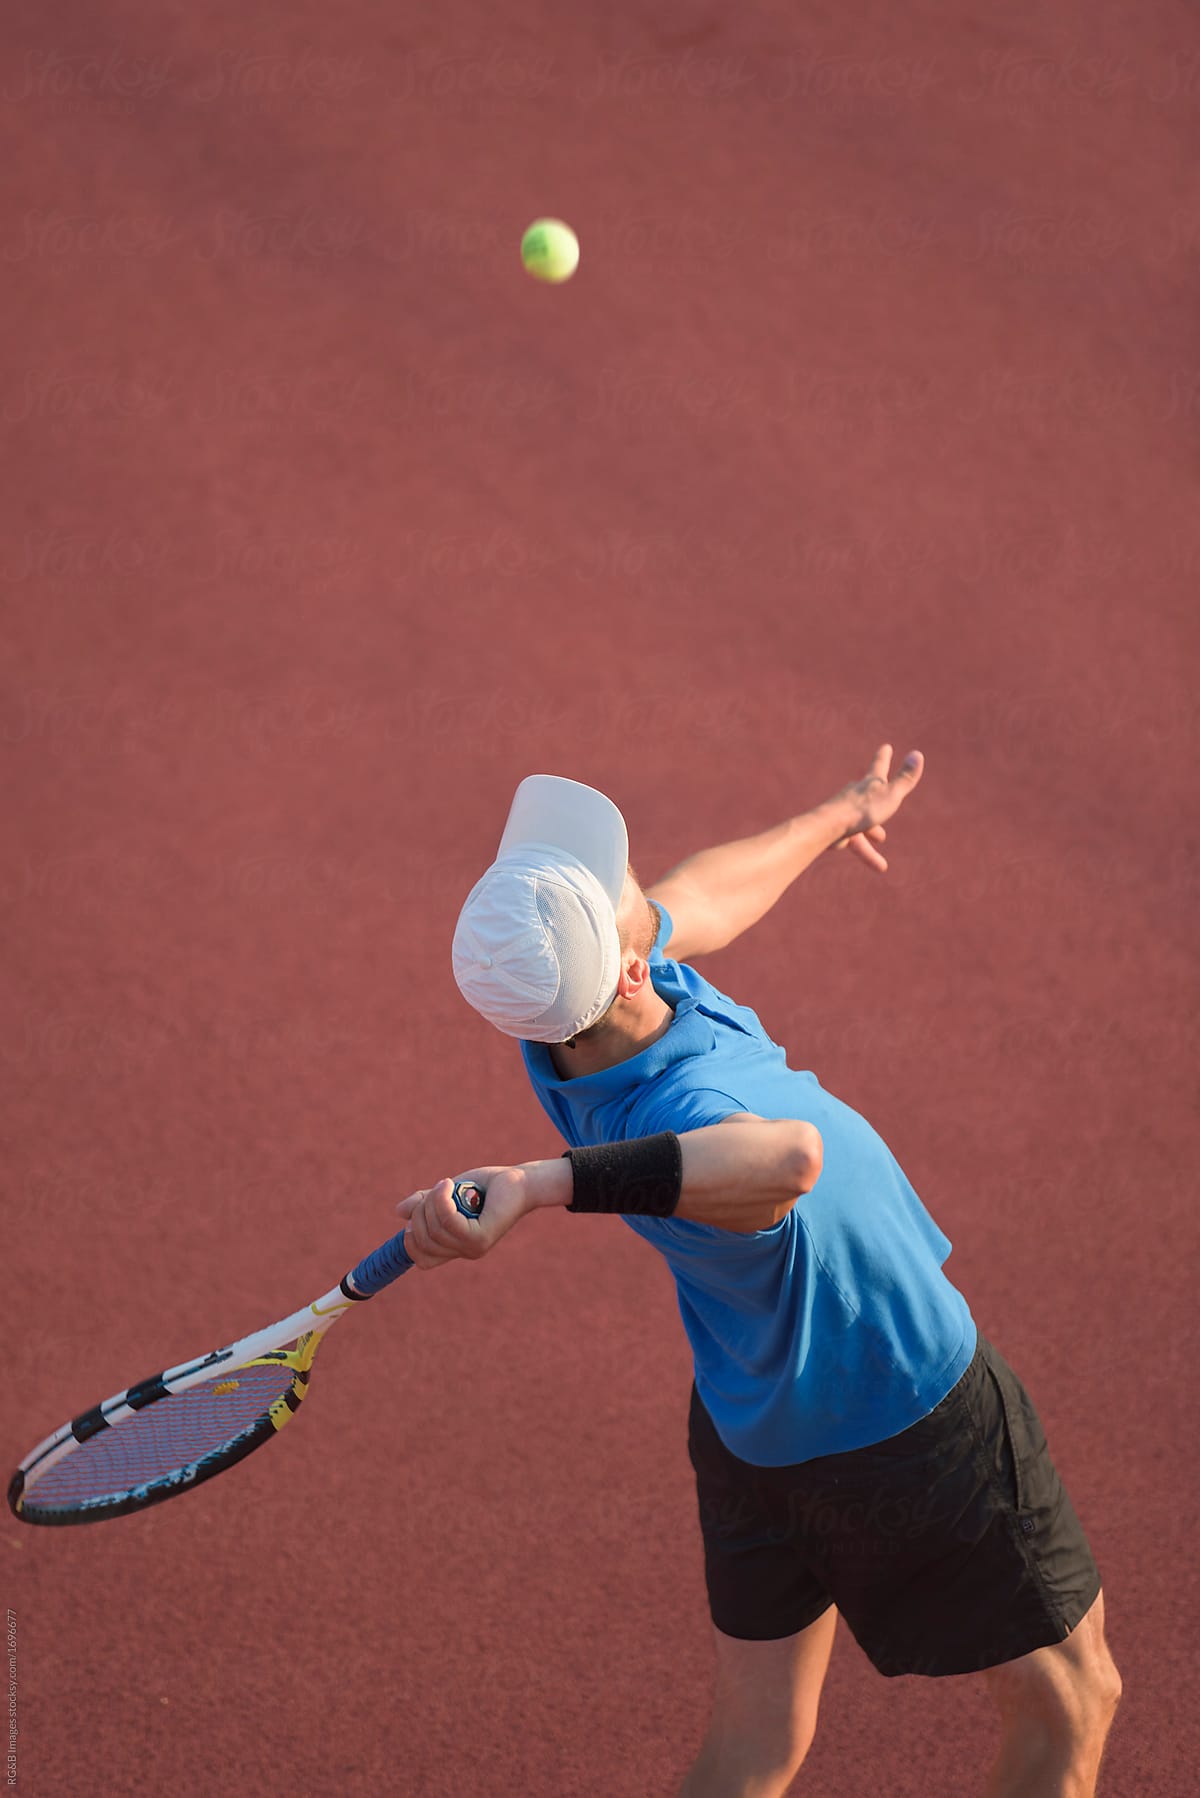 Male tennis player preparing to hit the ball